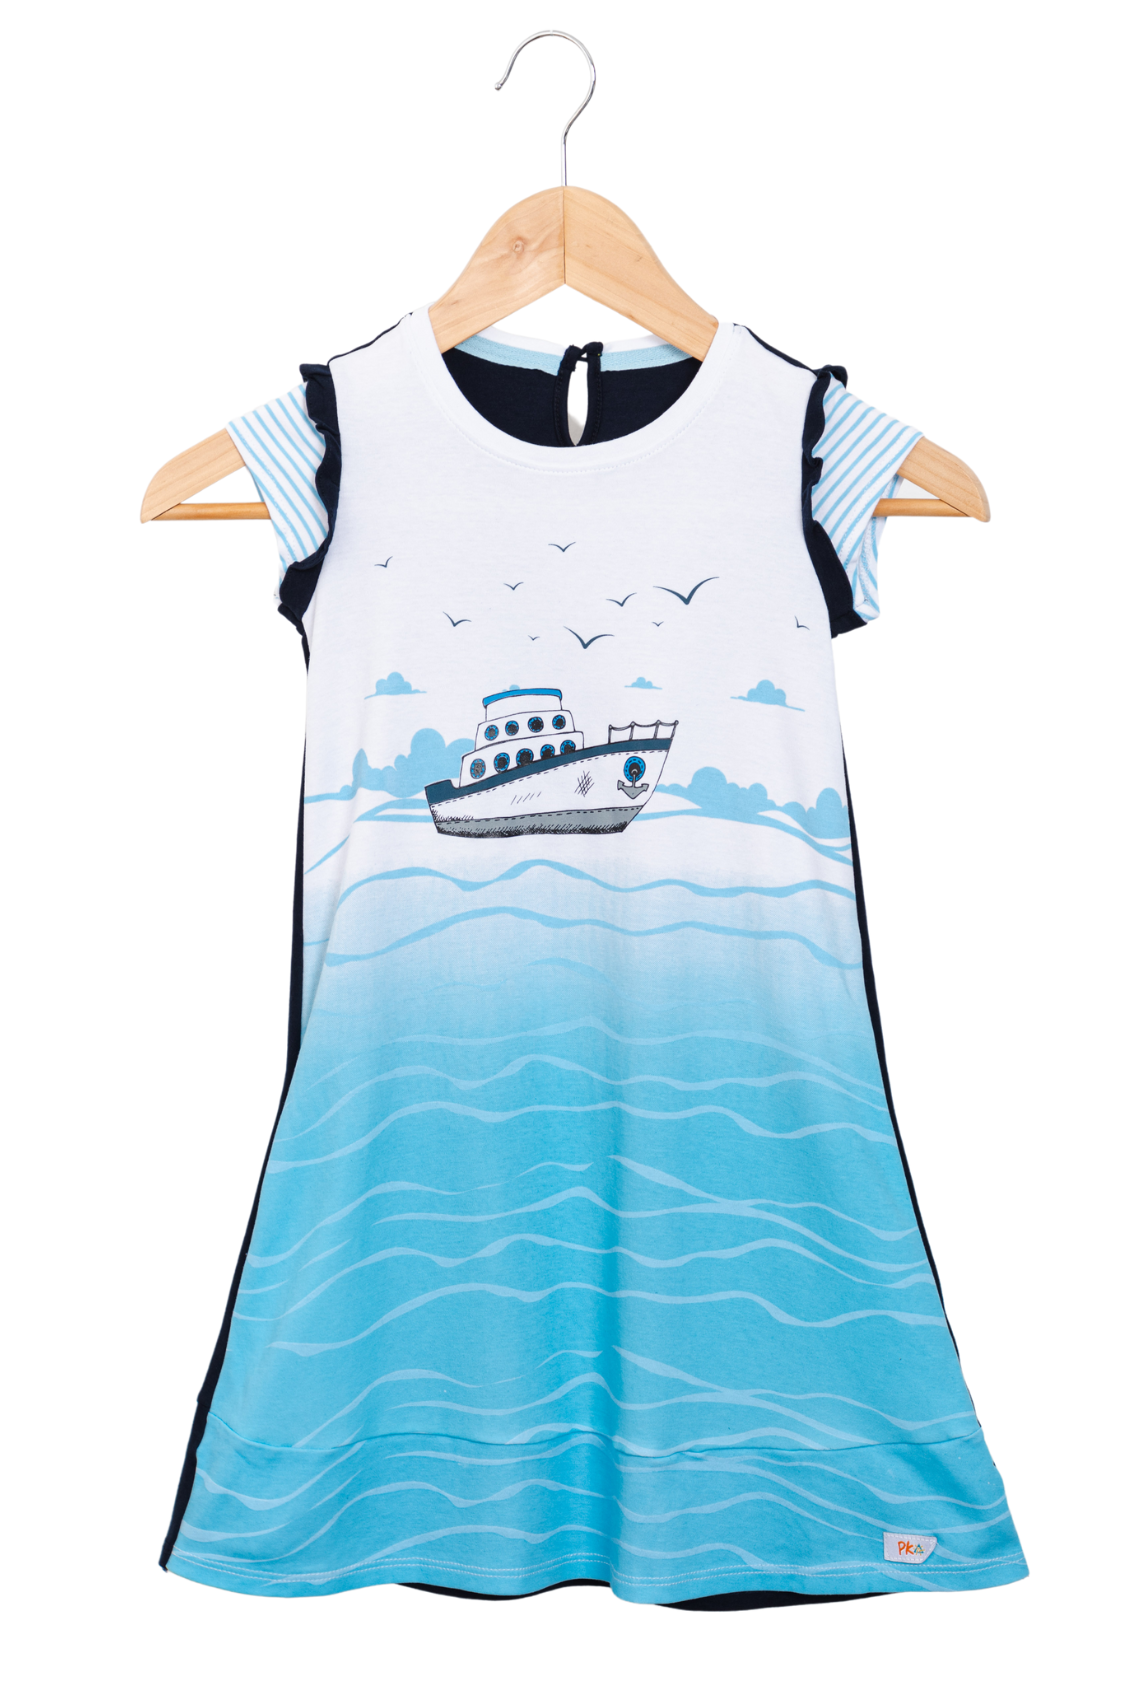 Girl dress with pockets, Boat in the ocean. Made in Sustainable material, children clothes. Eco-friendly fashion for kids - Prisma Kiddos